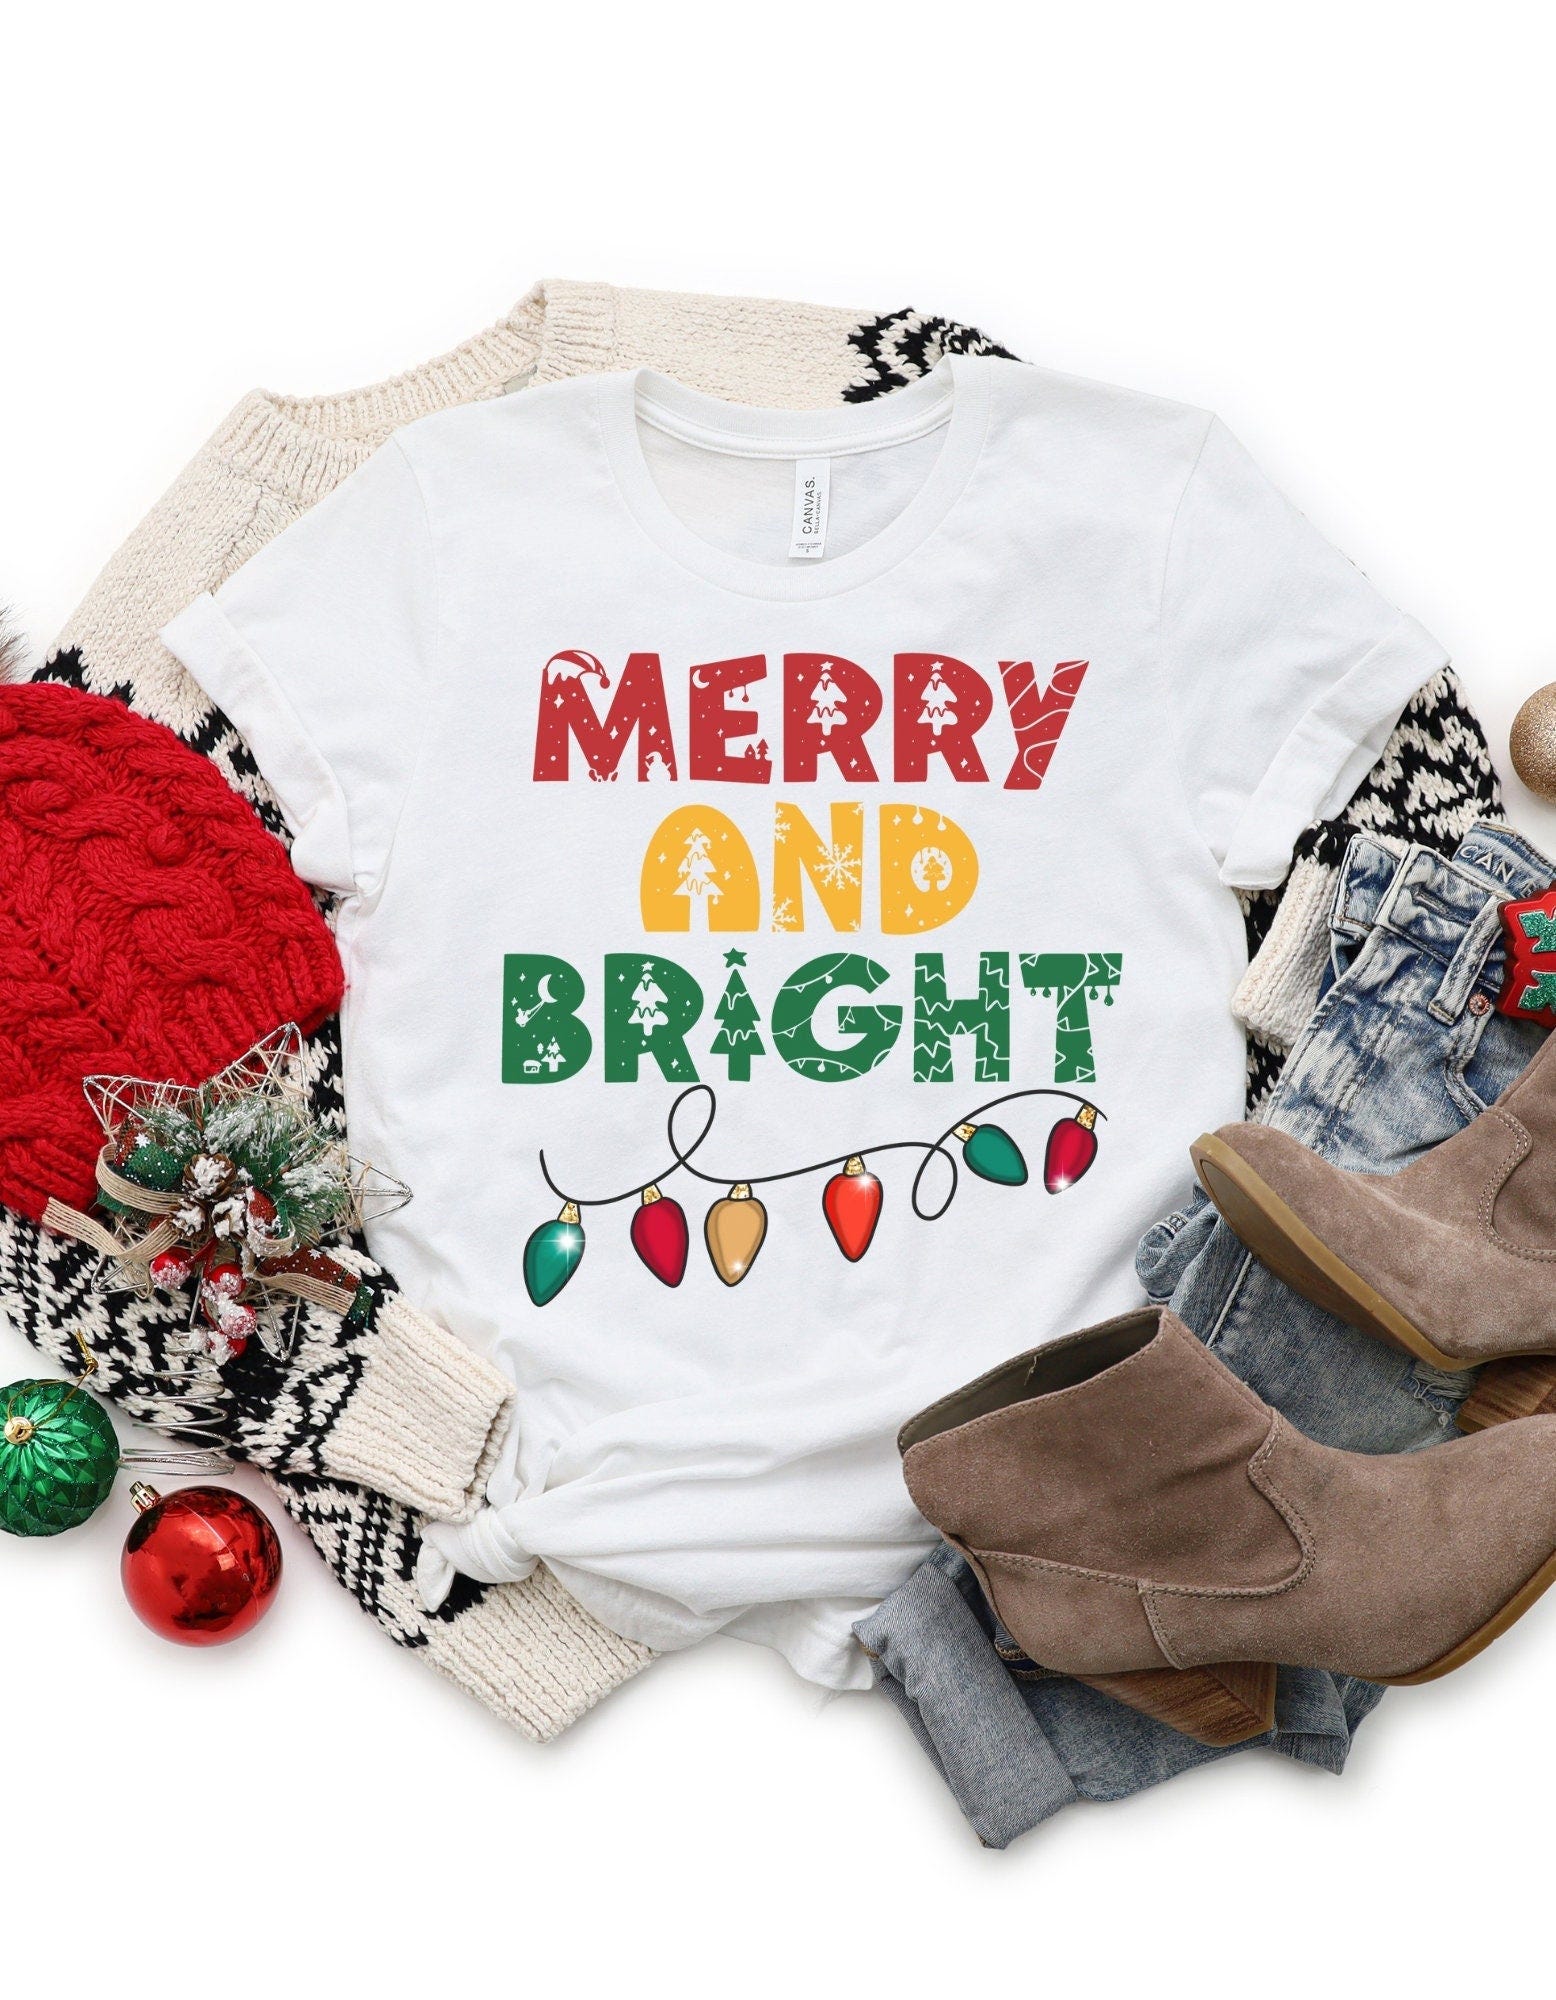 Merry and Bright Short Sleeve Tee, Christmas T shirt, Crew Neck T-Shirt, Holiday Top, Strand of Lights Shirt, Graphic Design, X-mas Clothing